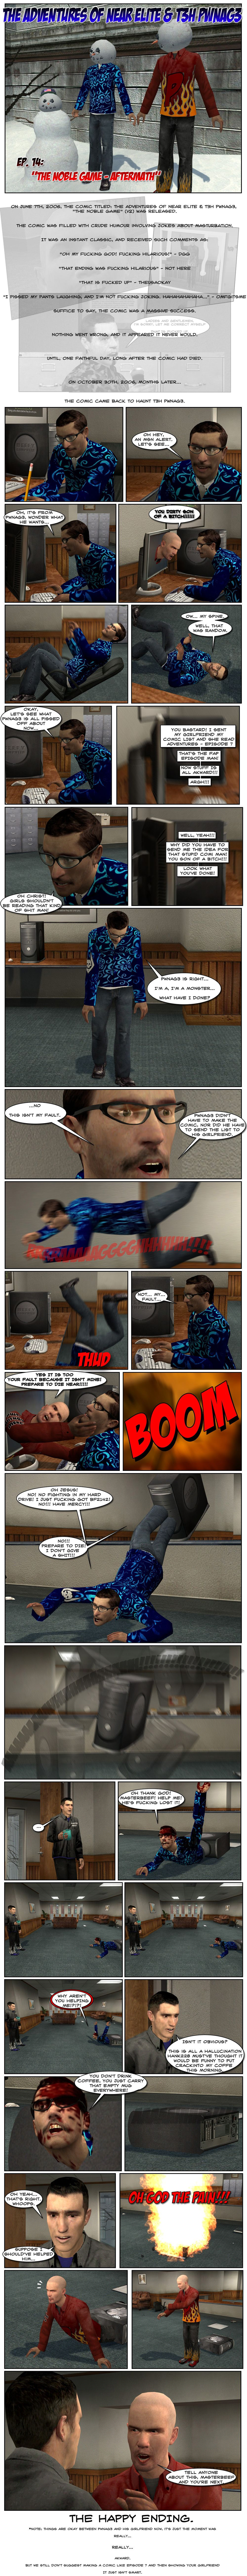 On June 7, 2006, the comic titled The Adventures of Near Elite & T3h Pwnag3, The Noble Game V2, was released. The comic was filled with crude humor involving jokes about masturbation. It was an instant classic and received comments such as: Oh my fucking God! Fucking hilarious, by DGG; That ending was fucking hilarious, by Not Here; That is fucked up, by Theusaokay; I pissed my pants laughing and I’m not fucking joking, by OMFGItsme. Suffice to say, the comic was a massive success. Nothing went wrong, and it appeared it never would. Until one faithful day, long after the comic had died. On October 30, 2006, months later, the comic came back to haunt T3h Pwnag3. We see Near Elite scribbling with a pencil when he notices an MSN message alert. He checks it and sees it’s from T3h Pwnag3, then wonders what he wants. Suddenly, Pwnag3’s head comes out of the computer monitor, screaming you dirty son of a bitch. Startled, Near Elite falls back from his chair onto the ground. He groans about his spine and comments that was random, then sits back down and checks what Pwnag3 is all pissed off about now. Pwnag3’s messages say he sent his girlfriend his comic list and she read Adventures episode 7, the fap episode, now stuff is all awkward. Near replies oh Christ, girls shouldn’t be reading that kind of shit, man. Pwnag3 retorts well, yeah, then asks why did Near have to send him the idea for that stupid comic, man, look what you’ve done. Near stoops and admits Pwnag3 is right, he’s a monster, and asks what has he done. He then changes his mind and says no, this isn’t his fault, Pwnag3 didn’t have to make the comic, nor did he have to send the list to his girlfriend. Near Elite leaps back into his PC and messages Pwnag3 saying not my fault. Pwnag3 then leaps out of the computer screen and screams yes it is too Near’s fault because it isn’t his, then tells Near to prepare to die. An explosion occurs, then Near starts getting sucked into the desktop, screaming oh Jesus, no, no fighting in my hard drive, I just fucking got Battlefield 2142, have mercy. From inside the computer, Pwnag3 reports no, prepare to die, I don’t give a shit. They start fighting inside the computer. MasterBeef enters the room holding a mug and stares gobsmacked at the scenario. Bloodied, Near begs MasterBeef to help him. MasterBeef stares at him for moments, then Near asks why isn’t he helping. MasterBeef replies isn’t it obvious, this is all a hallucination, Hank228 must’ve thought it would be funny to put crack into his coffee this morning. Being pulled into the computer, Near retorts that MasterBeef doesn’t drink coffee, he just carries that empty mug everywhere. As Near is dragged fully into the computer, MasterBeef says oh, yeah, that’s right, oops, and supposes he should’ve helped Near. The computer bursts on fire as Near screams oh God, the pain. Pwnag3 then casually exits the computer, brushes his sleeve and tells MasterBeef if he tells anyone about this, he’s next. A final note states things are okay between Pwnag3 and his girlfriend now, it’s just the moment was really, really, awkward, but they still don’t suggest making a comic like episode 7 and then showing your girlfriend, it just isn’t smart. The end.